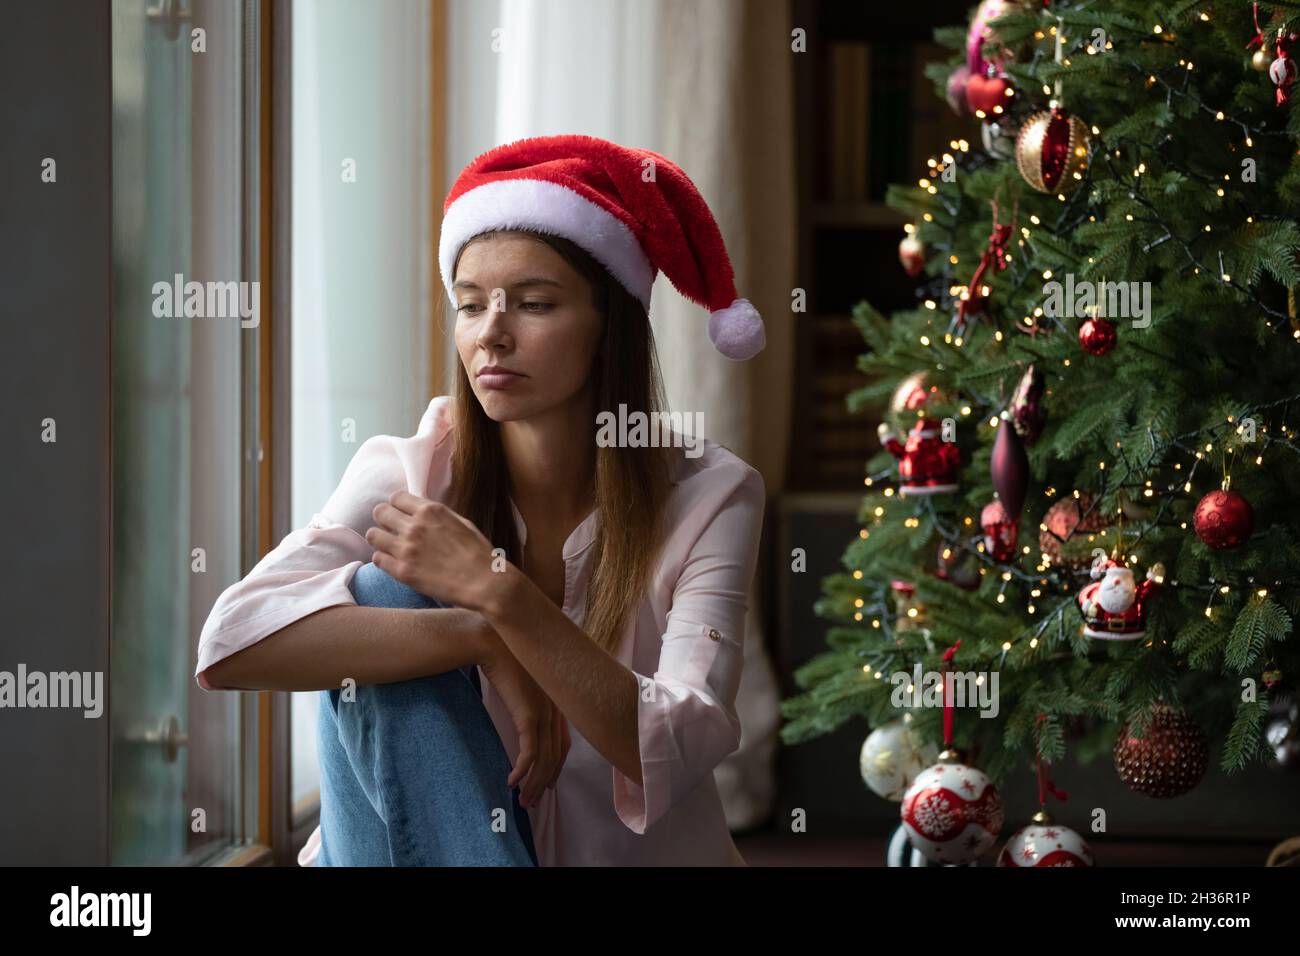 Frustrated Xmas young woman getting bored at Christmas tree Stock Photo